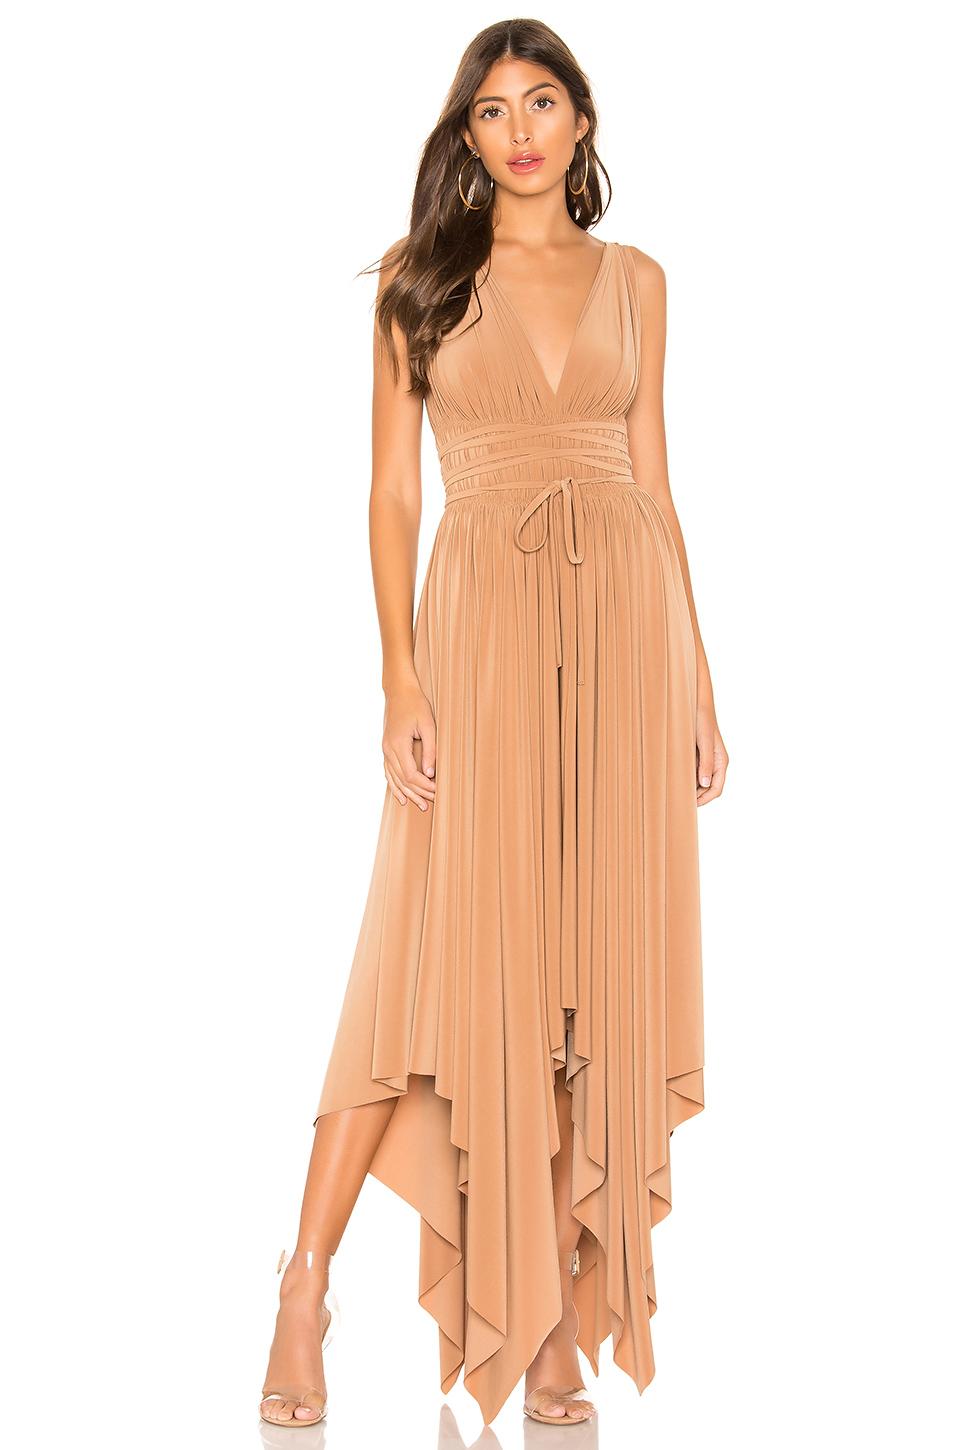 Norma Kamali Synthetic Goddess Dress in Brown - Lyst